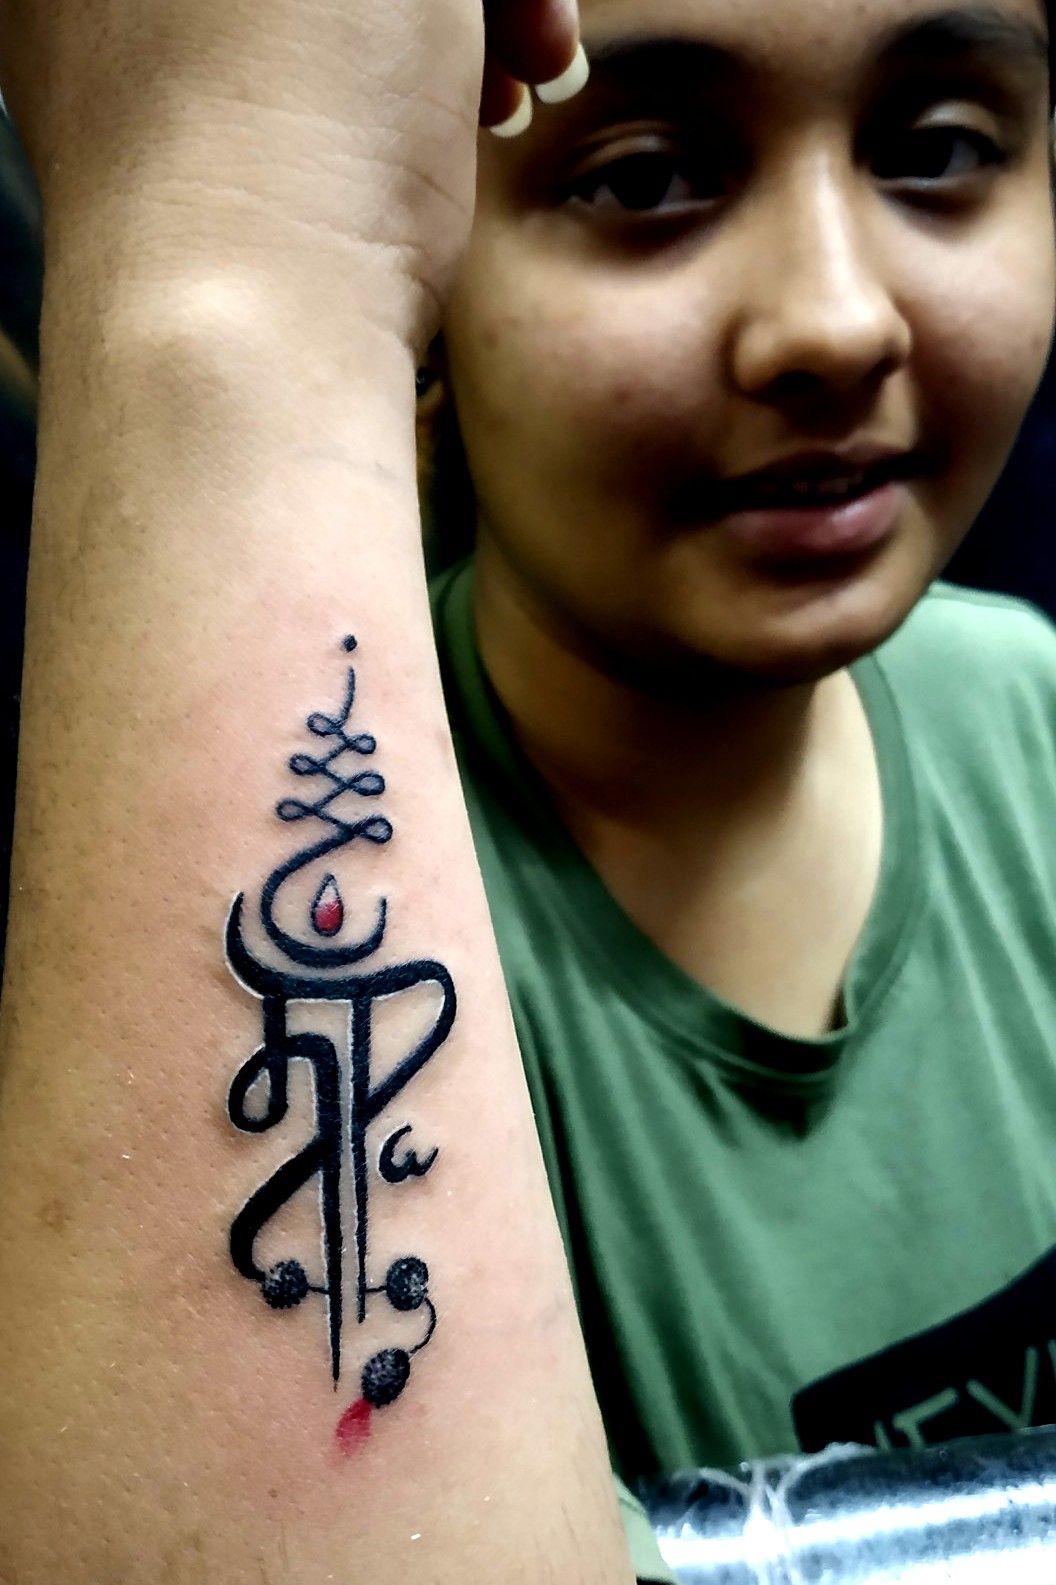 Some Of Our Name Tattoo Call For Tattoo In Surat Ketul Patel9574617671   Instagram